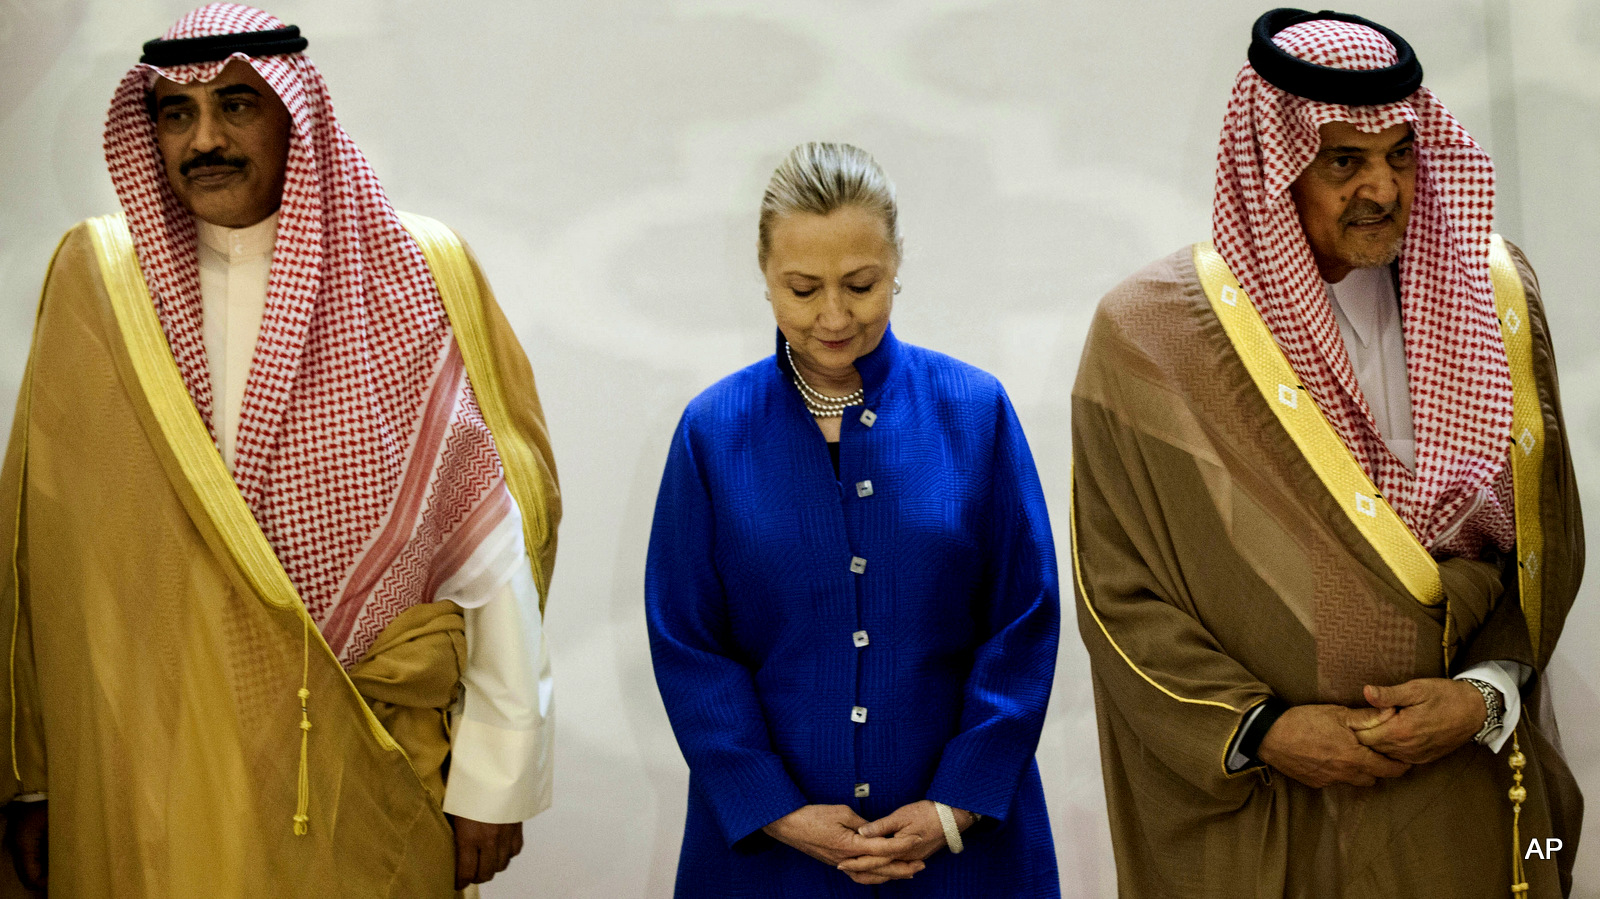 Saudi Foreign Minister Prince Saud Al-Faisal, right, U.S. Secretary of State Hillary Clinton, center, and Kuwaiti Foreign Minister Sheikh Sabah Khaled al-Hamad Al-Sabah, left, stand together prior to a group photo